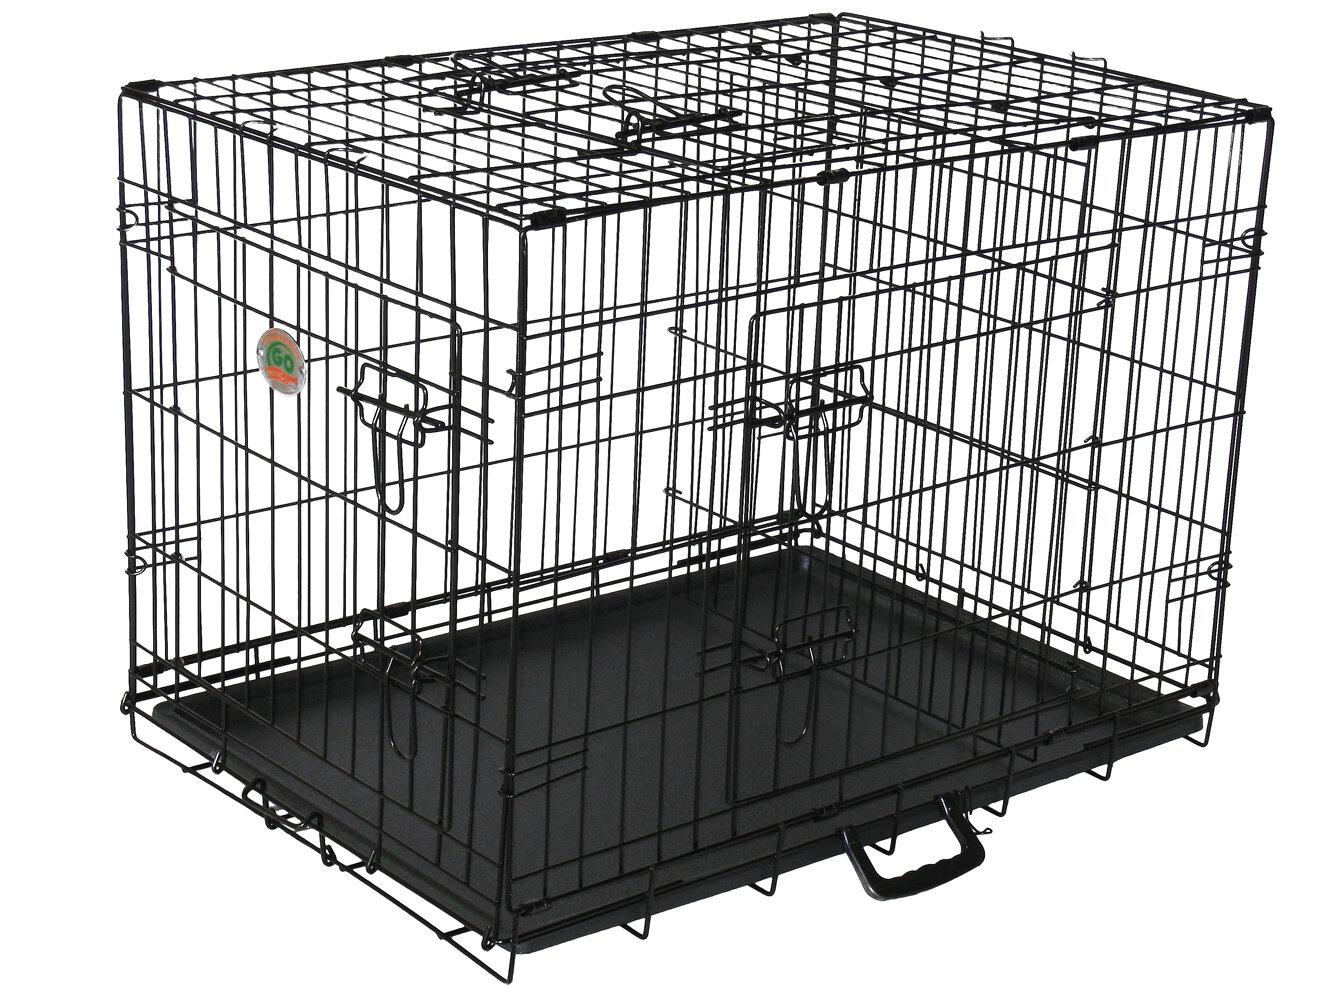 24 inch w/ Divider Size PETSWORLD Single Door Dog Crate Heavy Duty Folding Metal Dog or Pet Crate Kennel